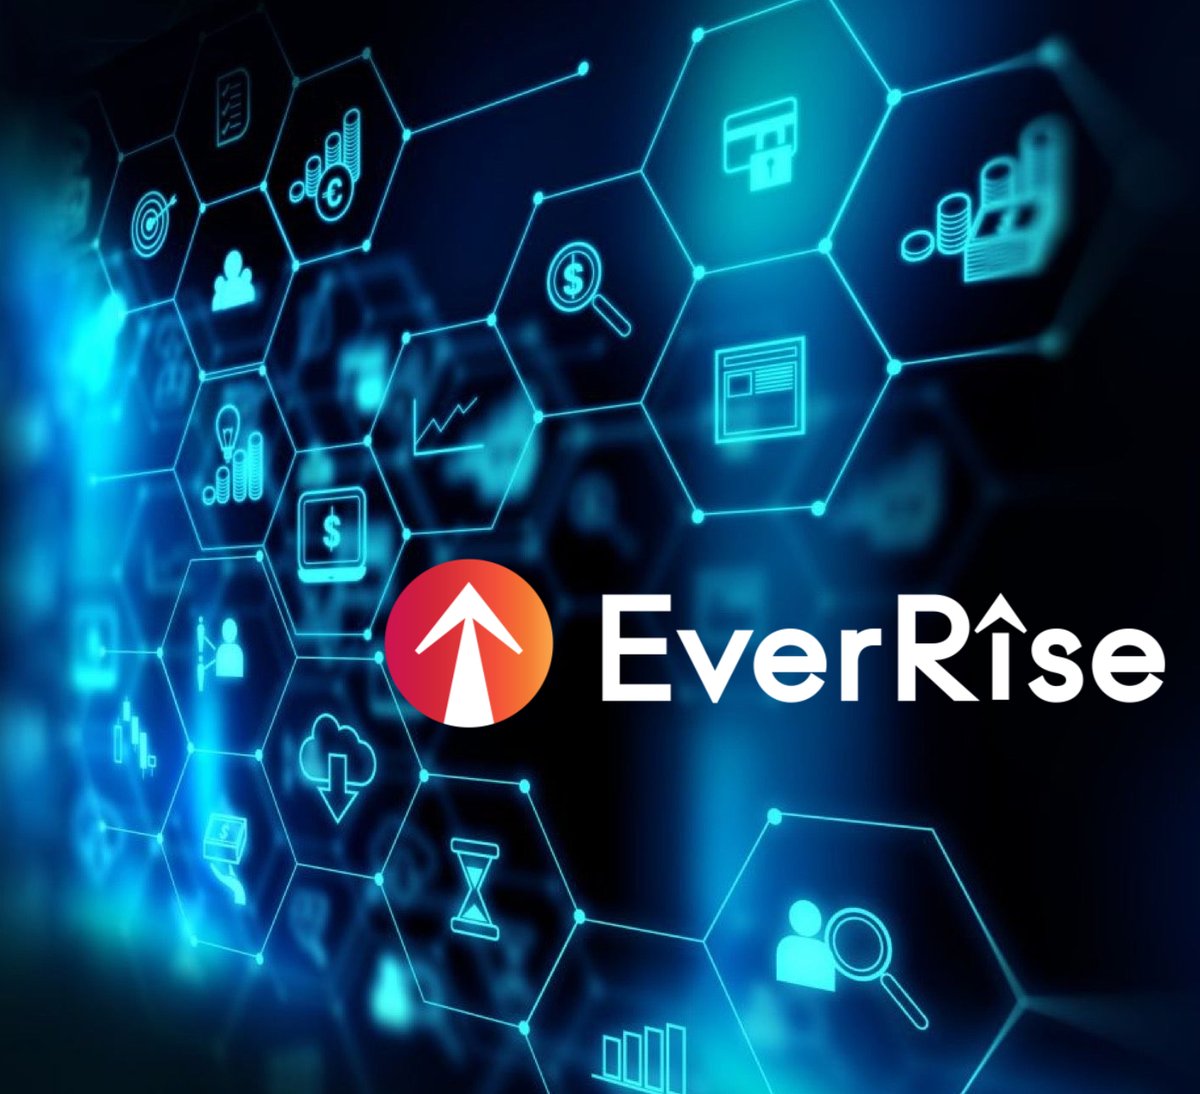 @CryptoNagato @EverRise is a gem. 💎
Many Dapps: #EverMigrate #Everswap #EverOwn #EverBridge #EverLock #EverRevoke #NFTStakingLab
The new @dAppSocial #CrossX 

Many others coming soon. 

Utility and security crypto